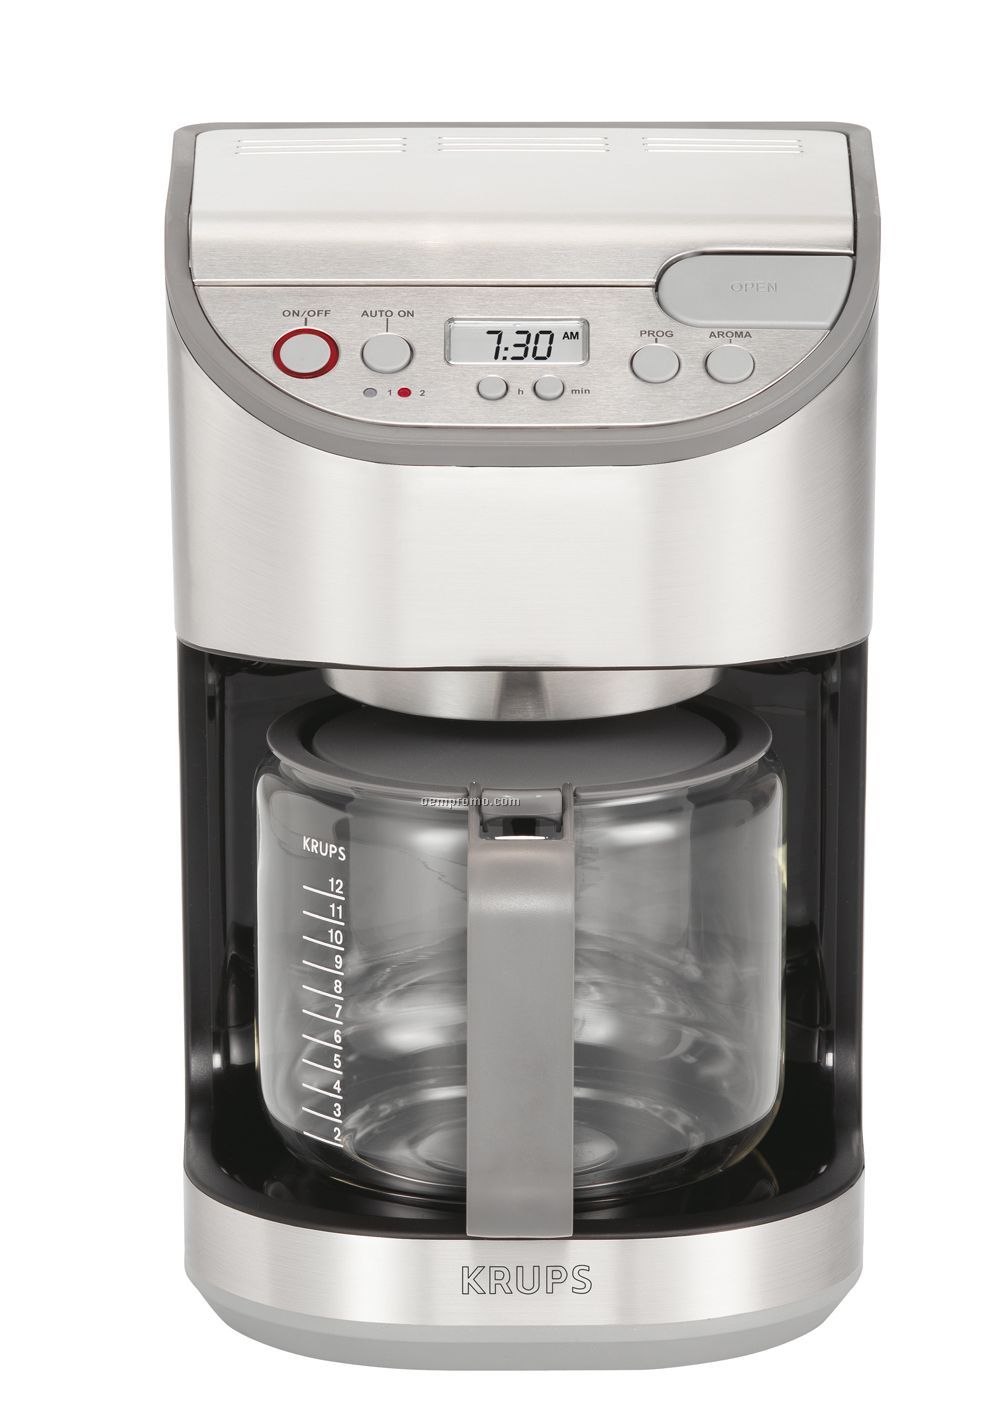 Krups 12 Cup Glass Stainless Steel Coffee Machine